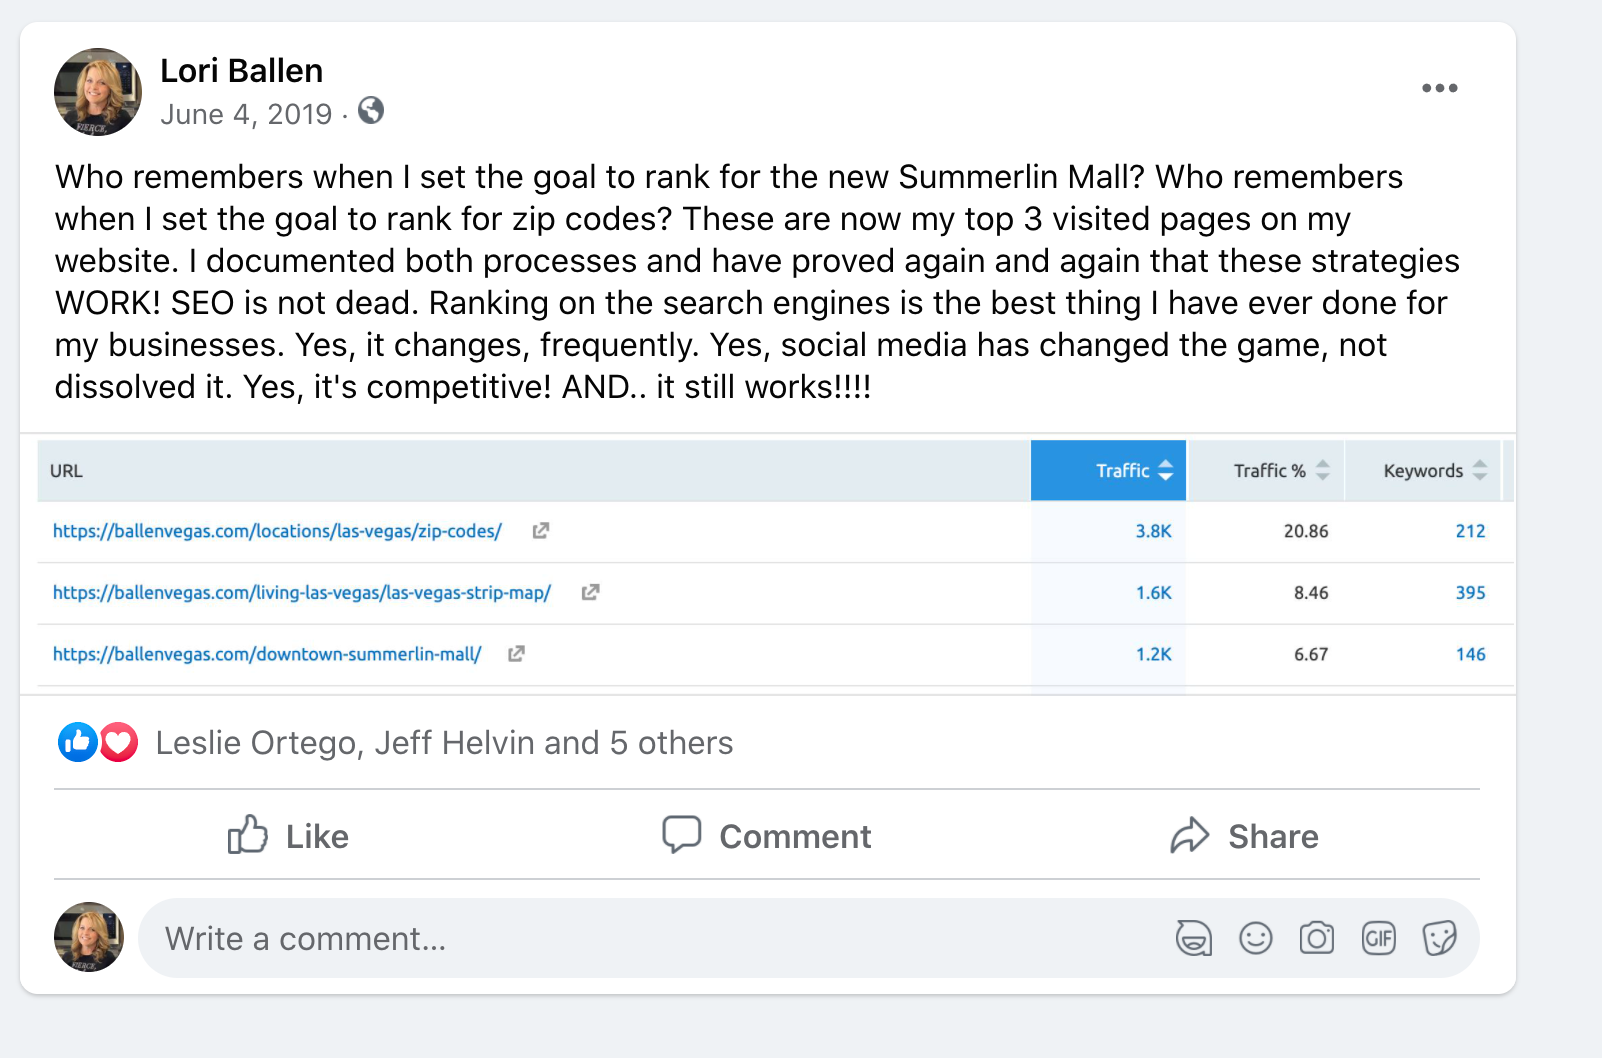 Lori Ballen shares results from her SEO case study on Facebook